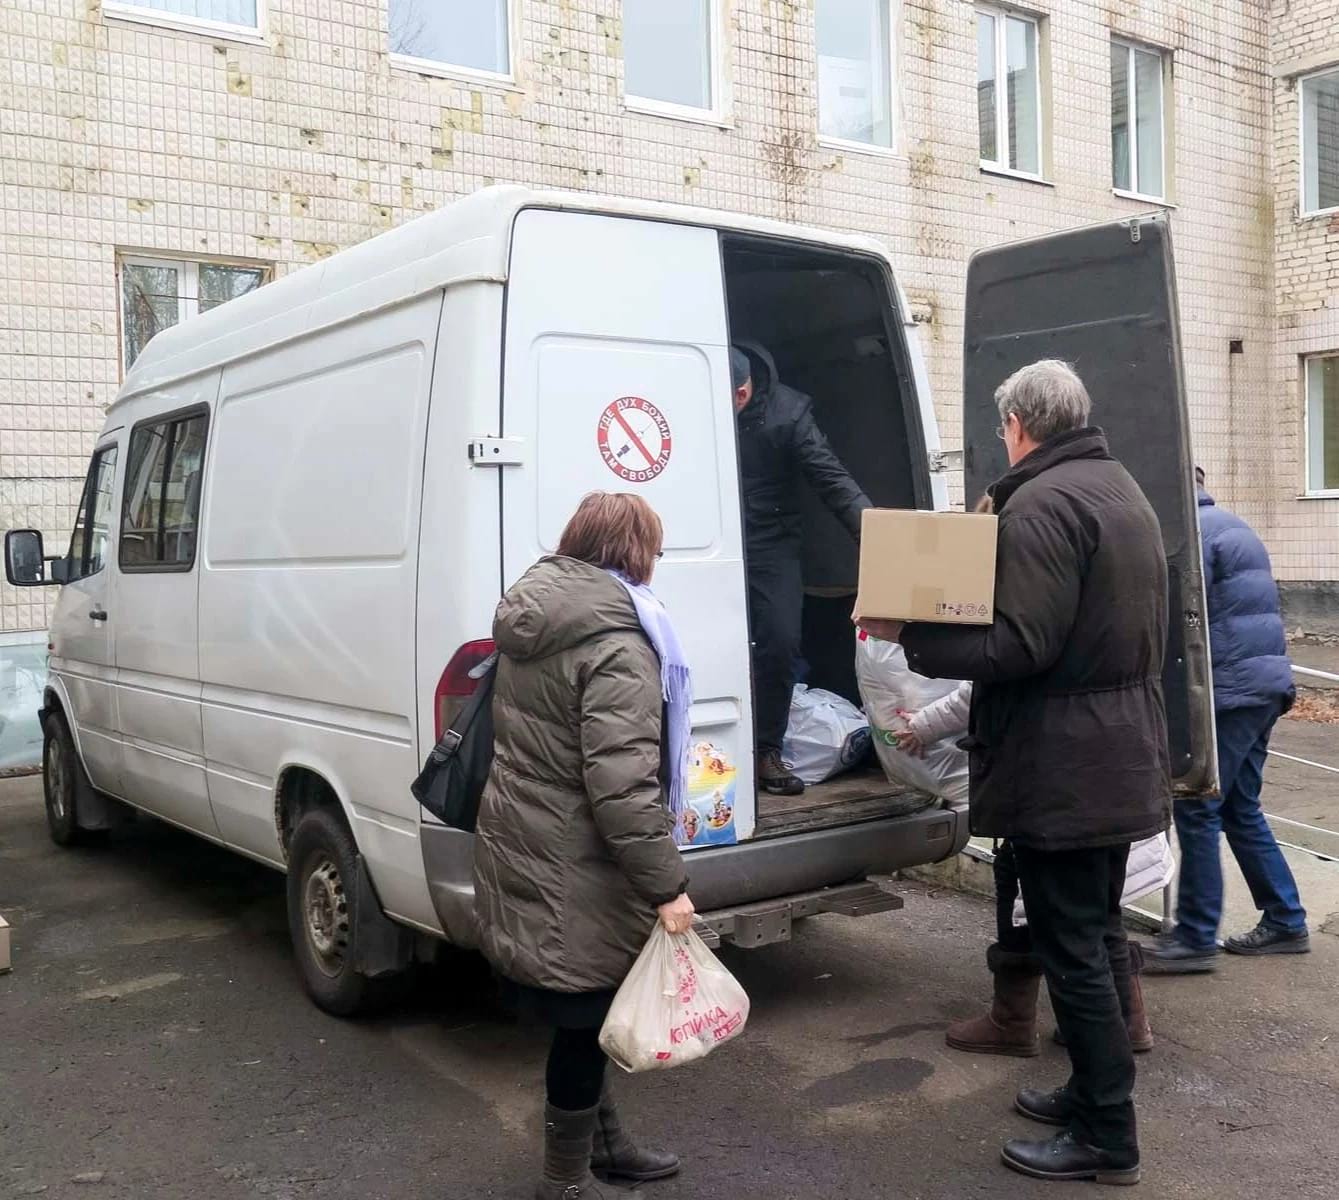 "Unstoppable" local churches in Ukraine and Russia are launching a large-scale humanitarian outreach across Ukraine as war erupts